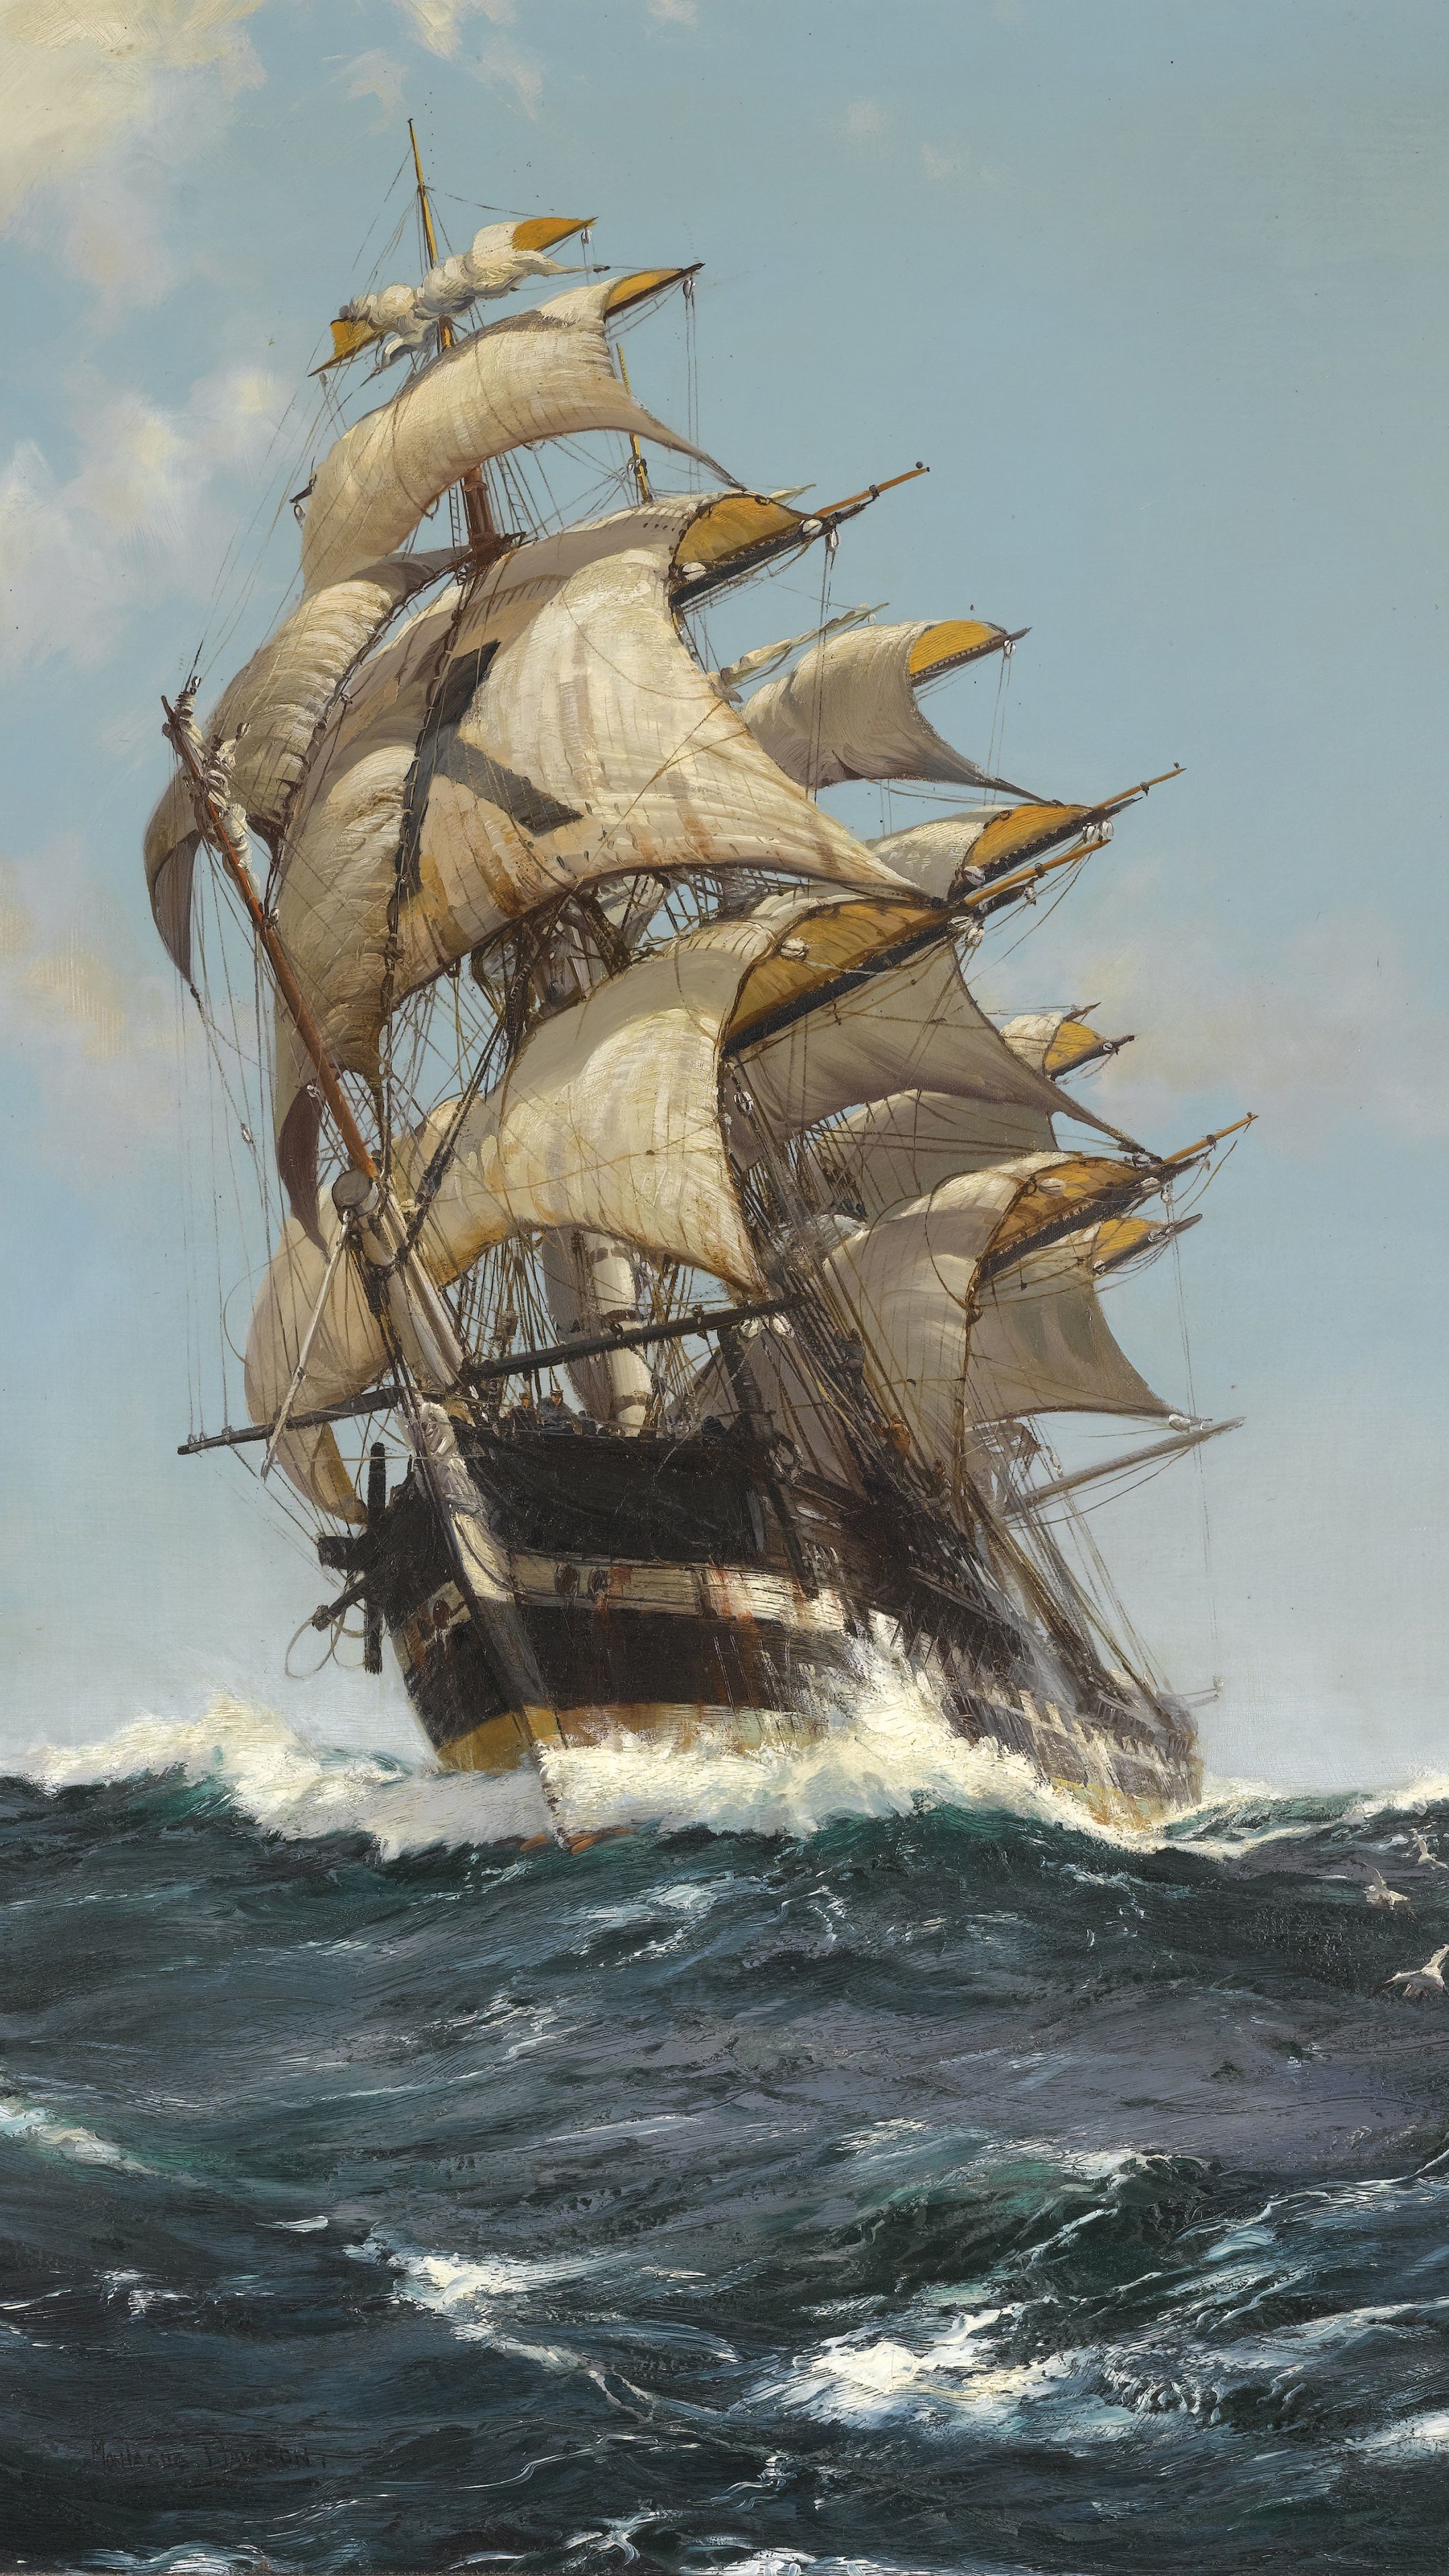 2160x3840 Phone Wallpapers (Curated) - Album on Imgur Sailboats, Pirate Ships,  Spanish Galleon